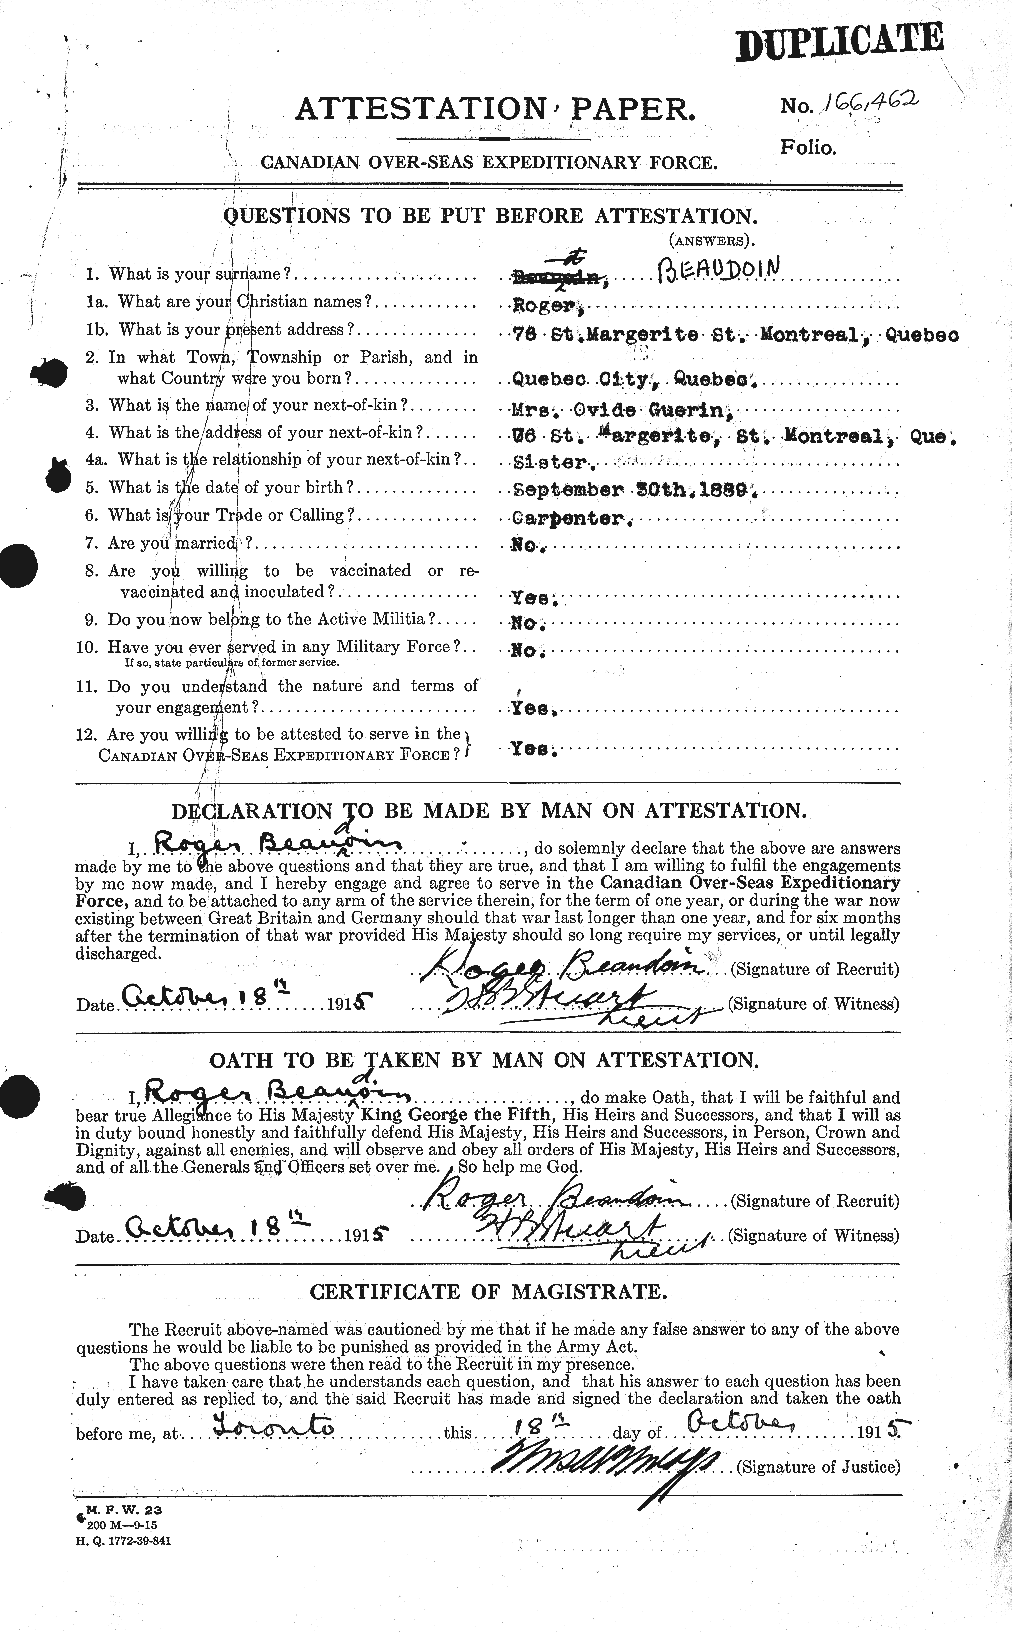 Personnel Records of the First World War - CEF 231296a